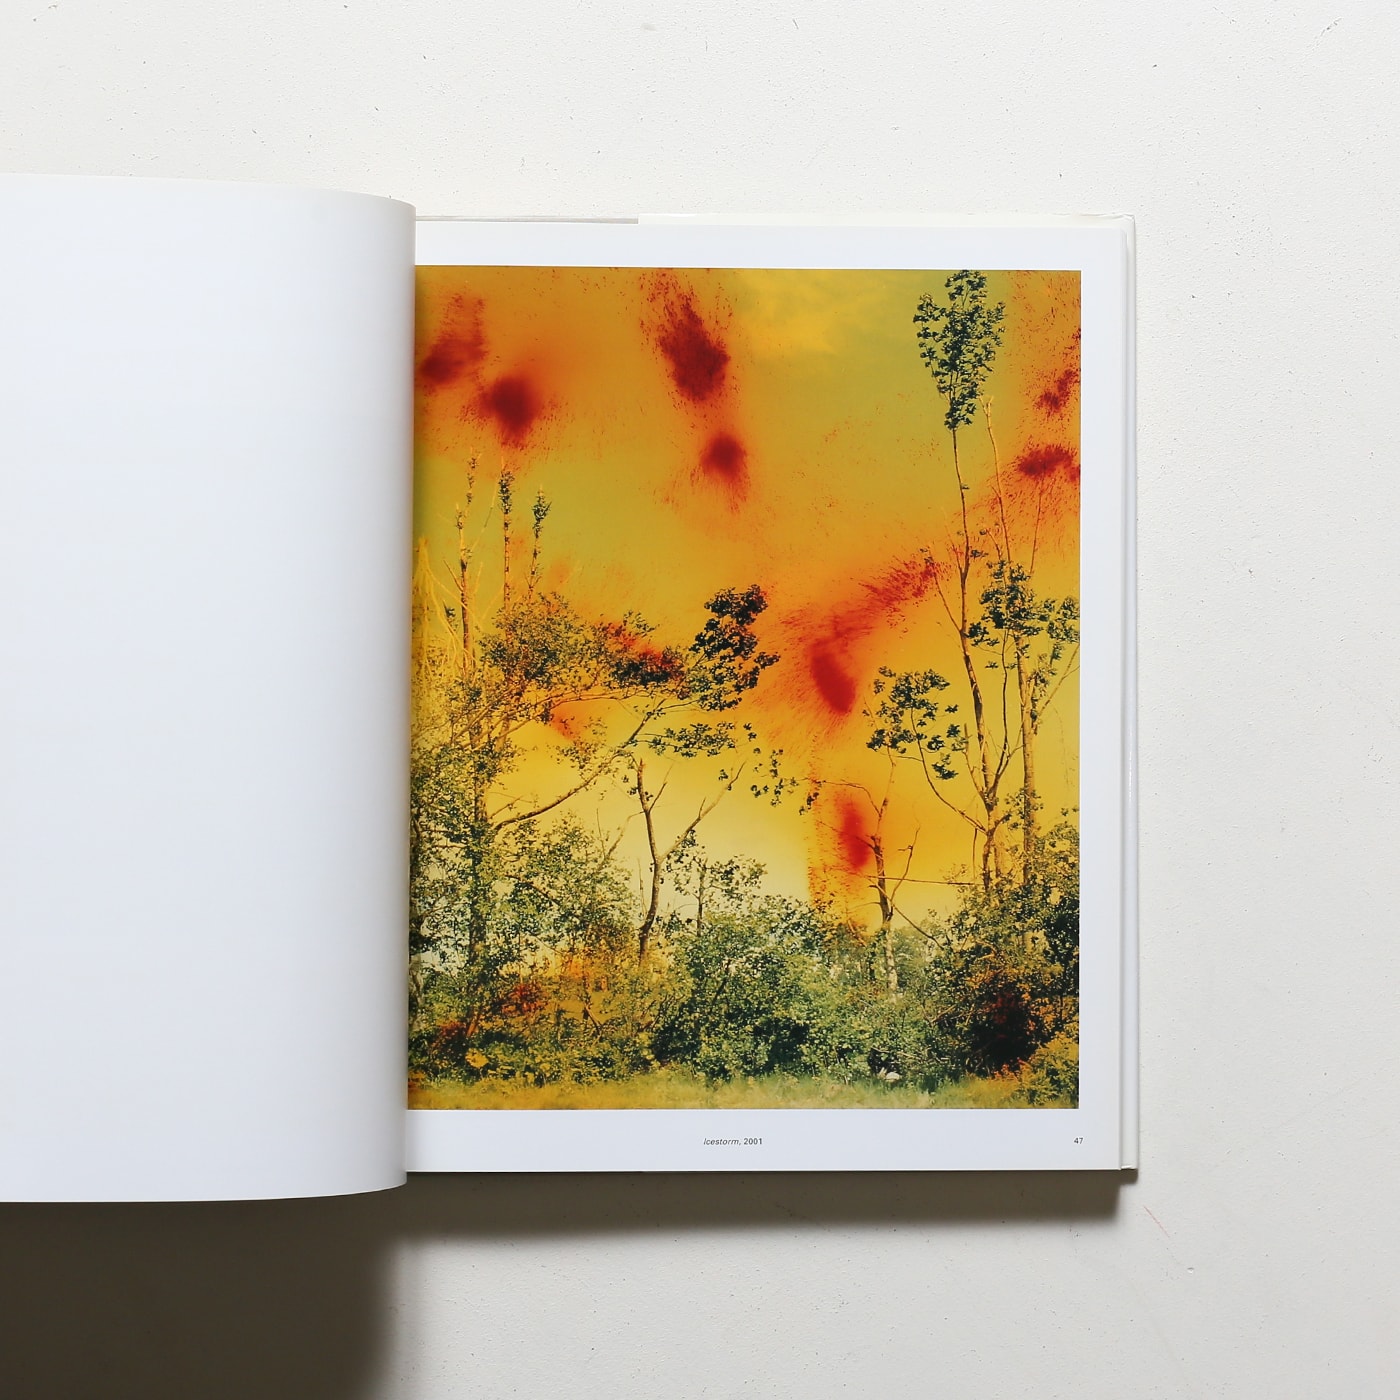 Wolfgang Tillmans: View from Above